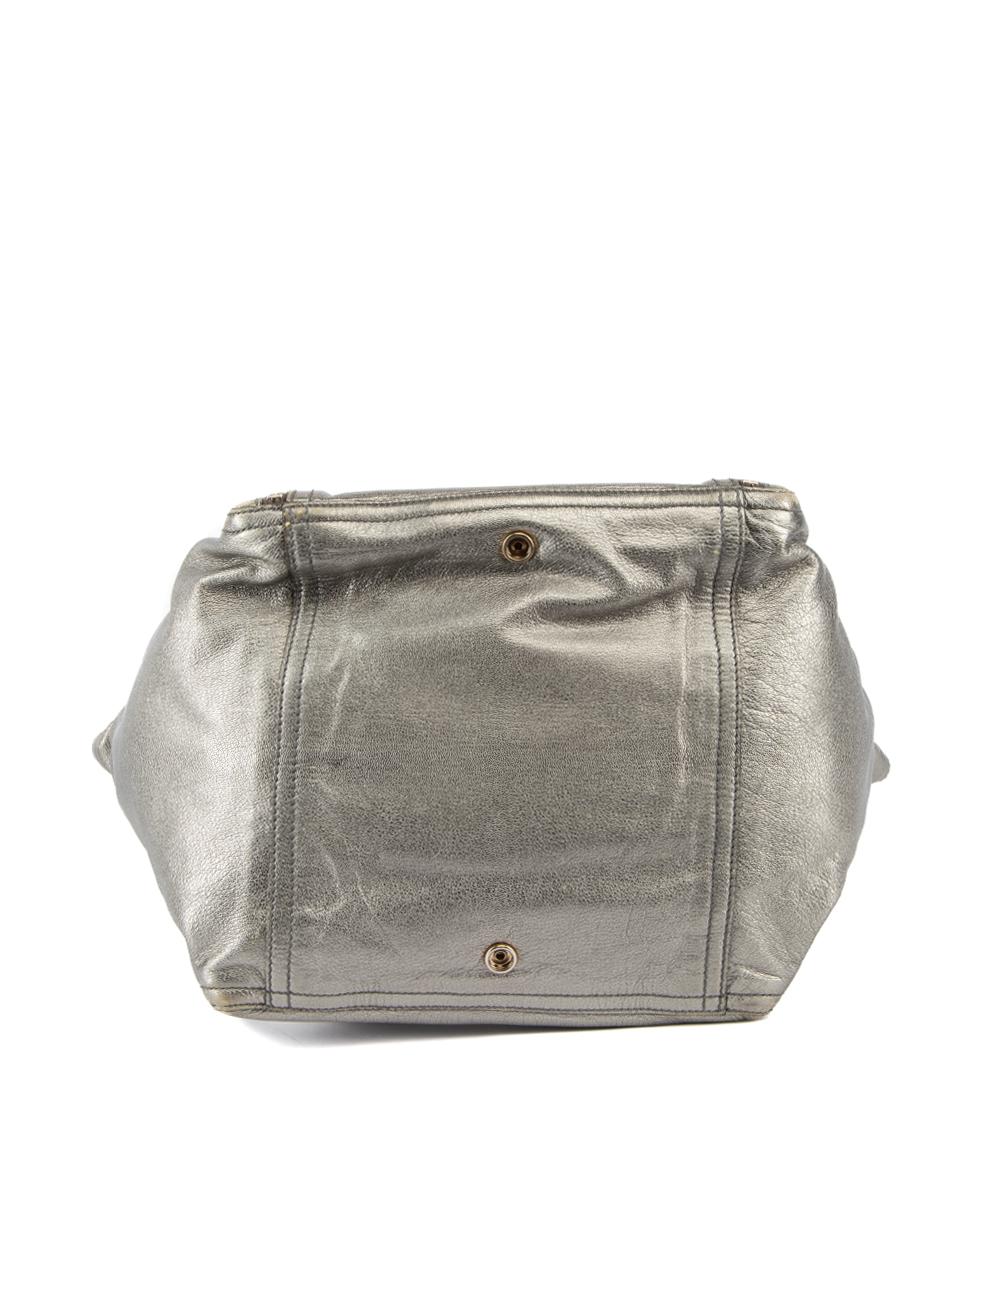 Pre-Loved Yves Saint Laurent Rive Gauche Women's Silver Metallic Leather Downtow 1